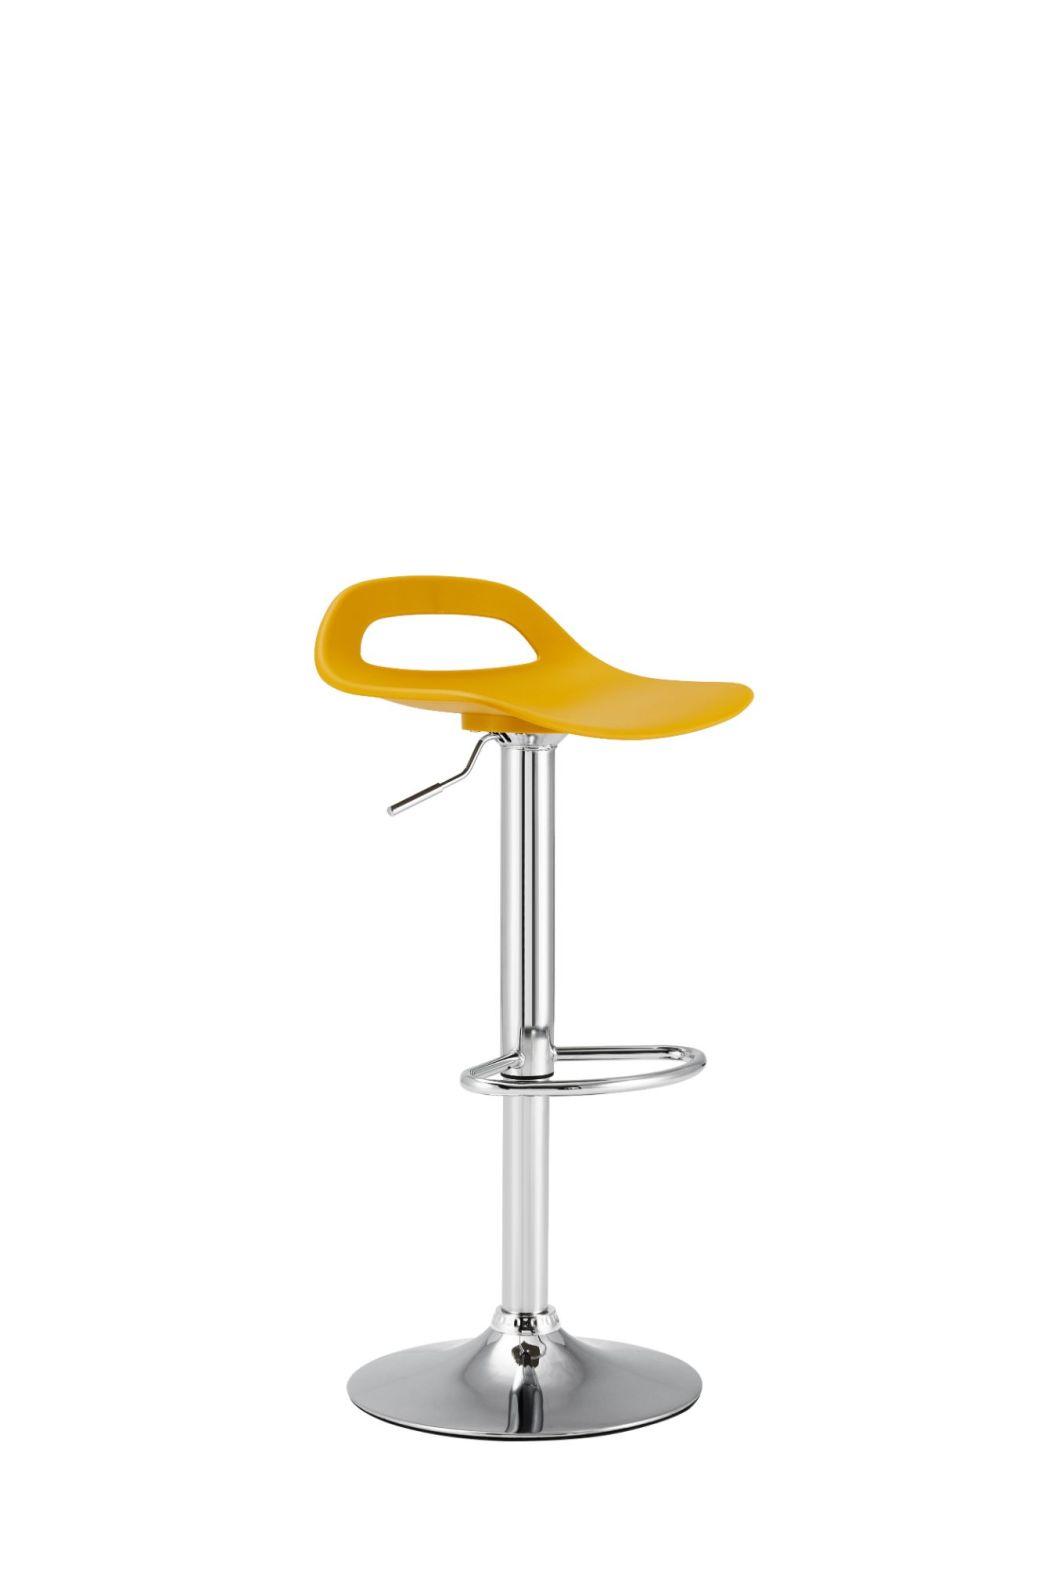 Factory Wholesale ABS Plastic Seat Kitchen Counter Bar Stool High Chair for Bar Table